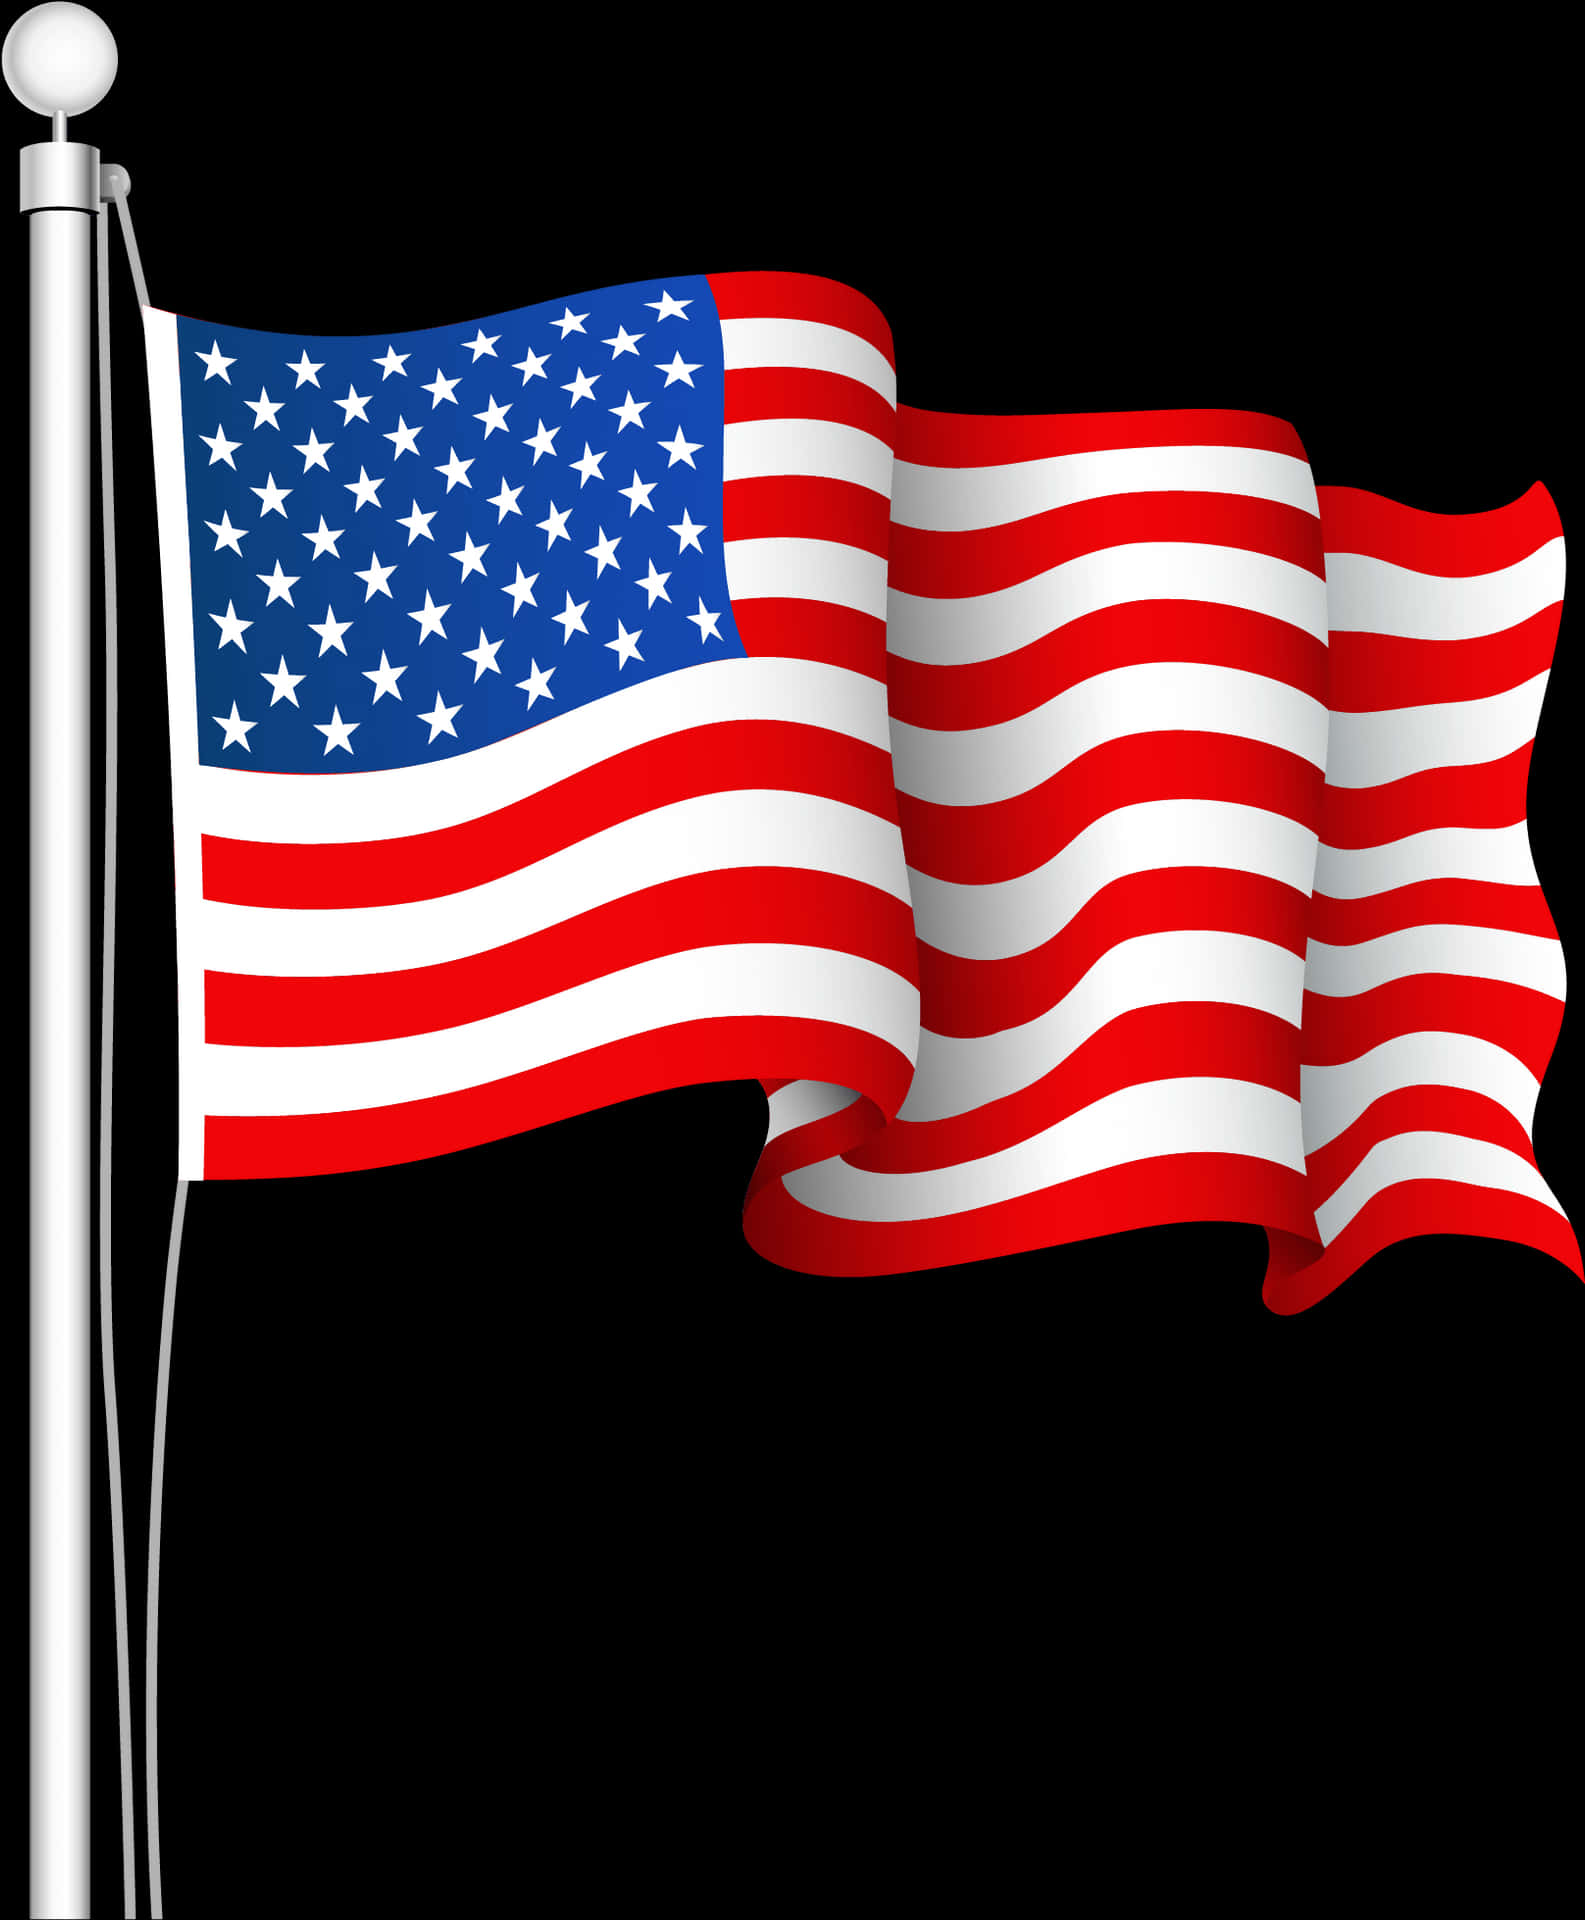 Waving American Flag Graphic PNG image